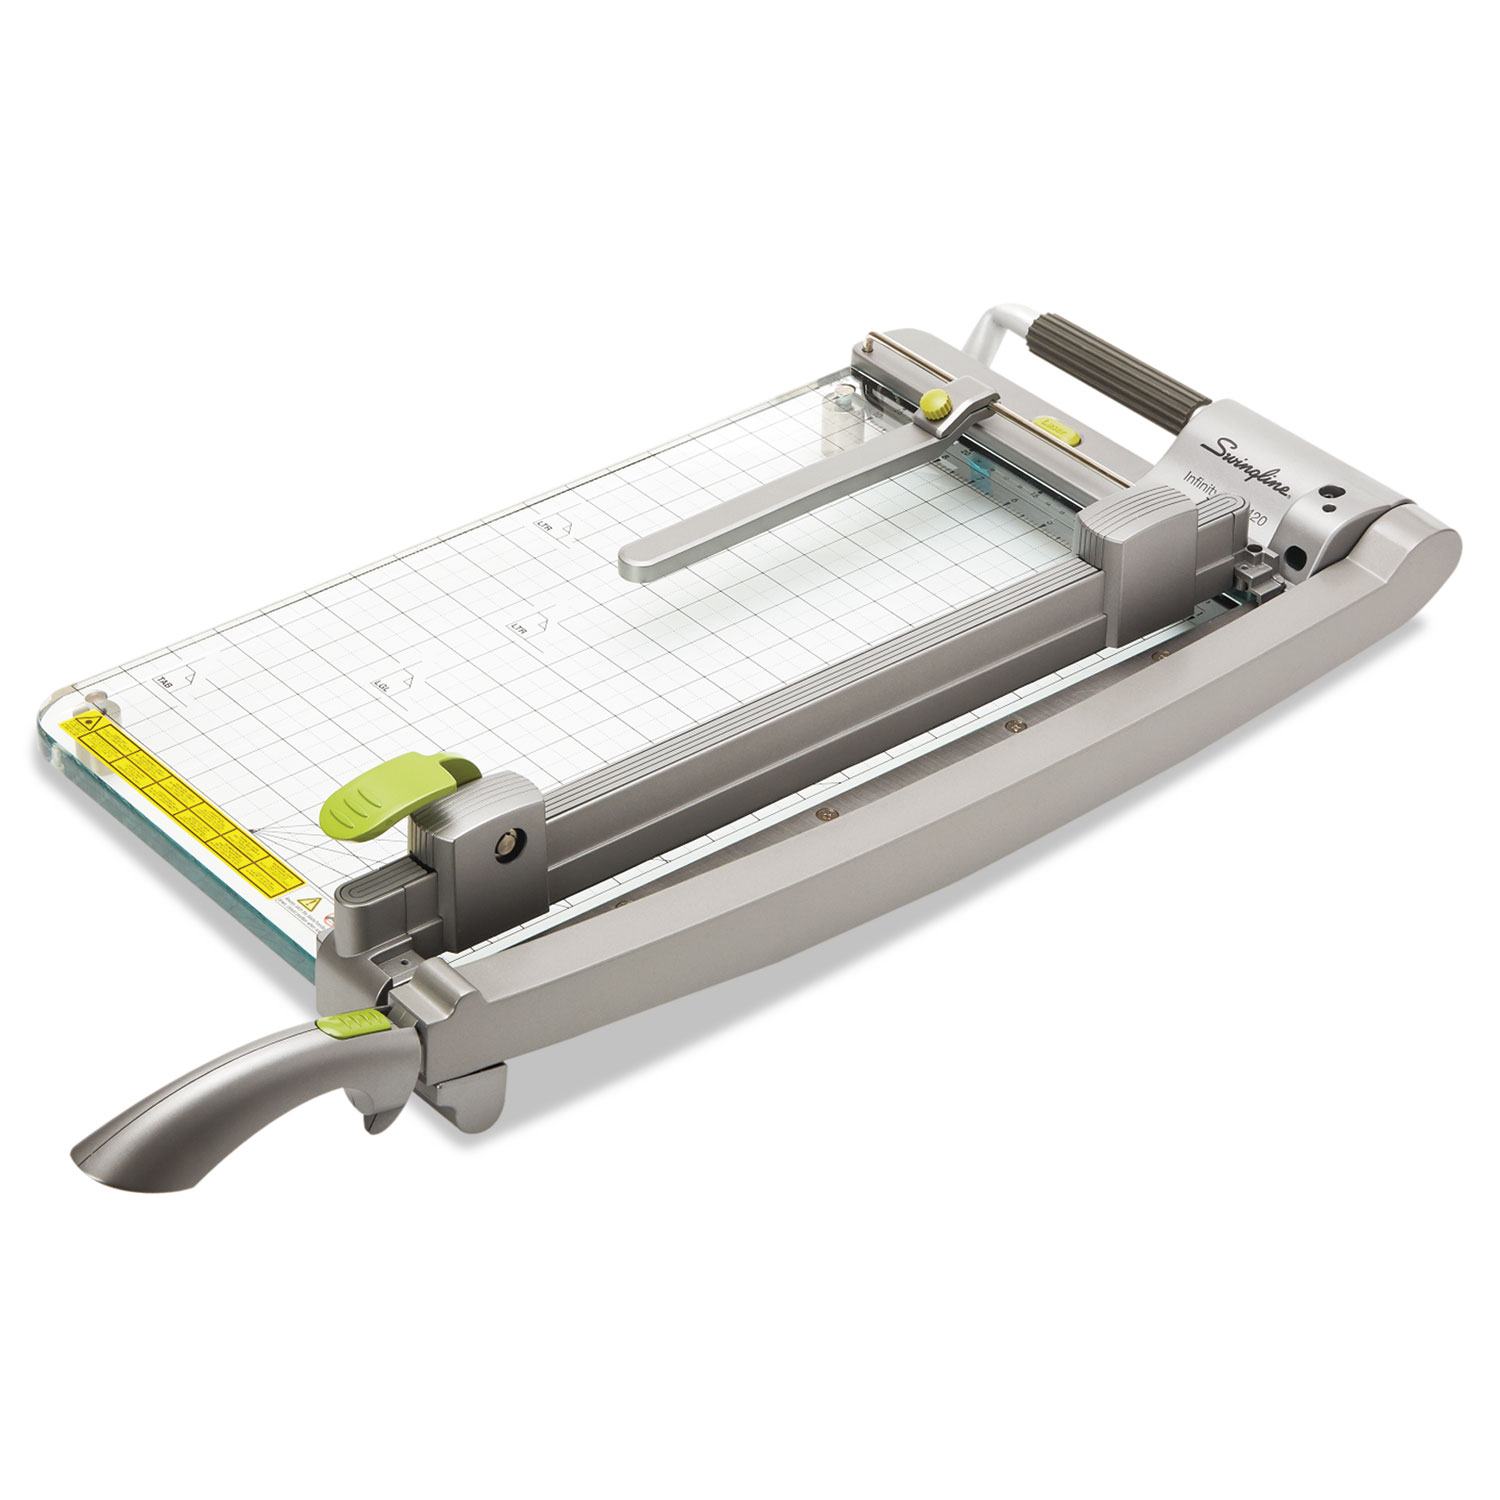 Infinity Guillotine Trimmer, Model CL420, 25 Sheets, 18 Cut Length